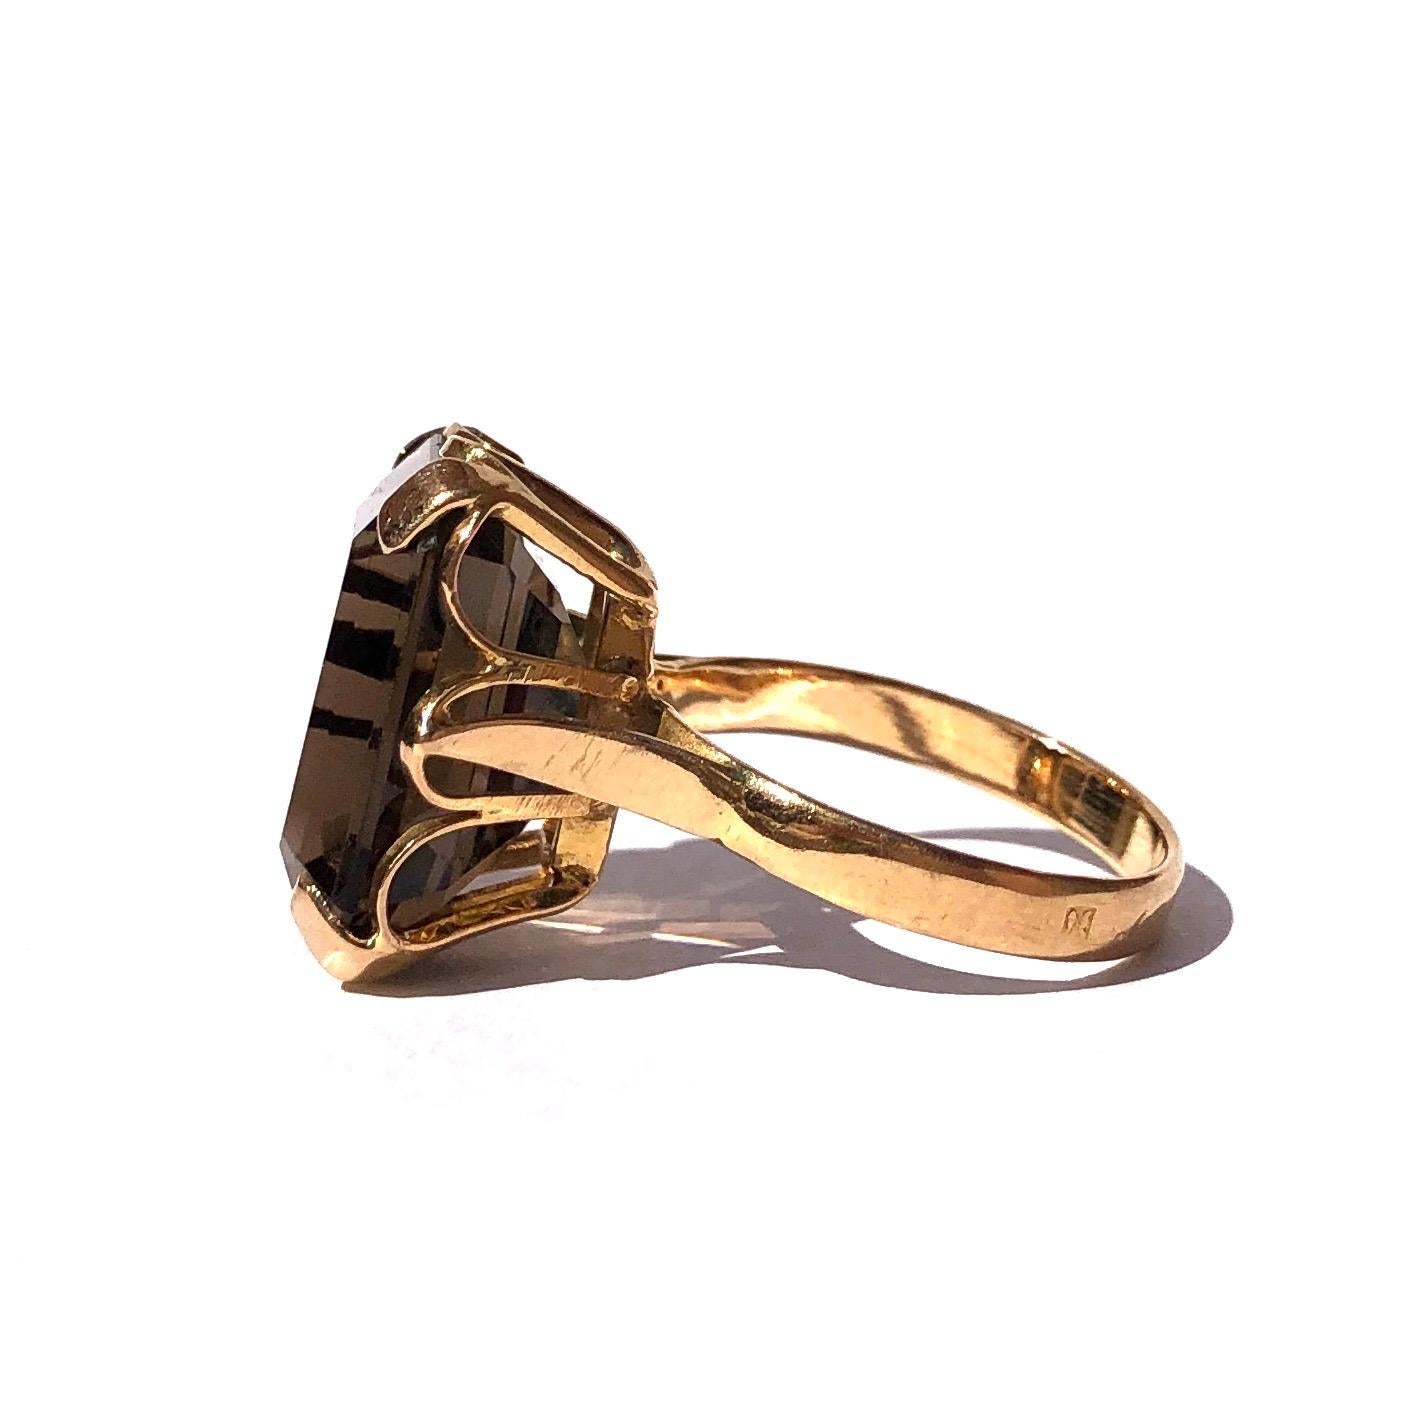 This wonderful scalloped gallery holds a deep smokey quartz up high. The ring is modelled in 18carat gold and the stone is held with a simple claw setting. 

Ring Size: K 1/2 or 5 1/2
Stone Dimensions: 12x16mm 
Height Off Finger: 10mm 

Weight: 5.17g